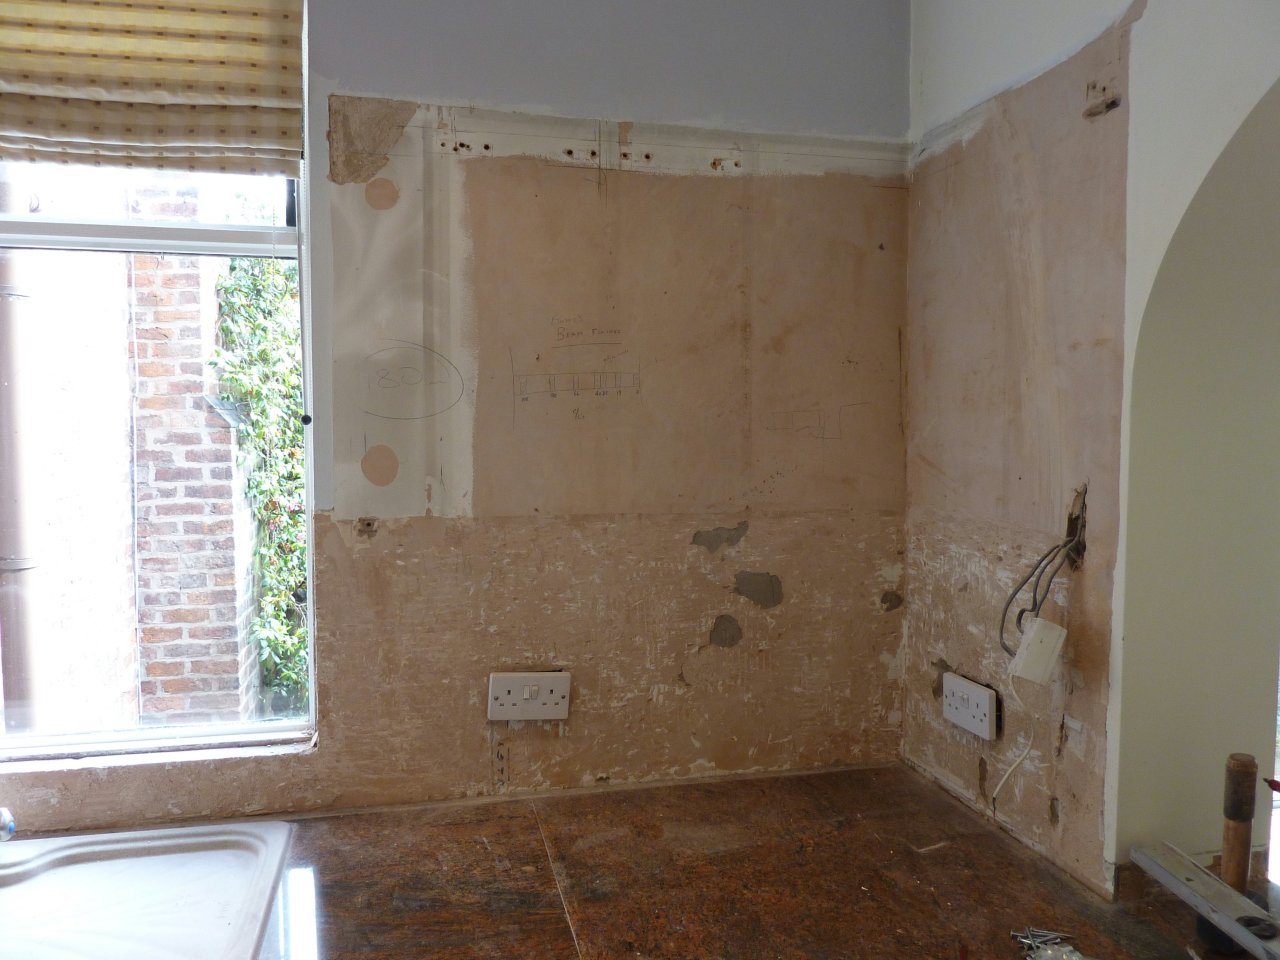 JPEG image - More wall cupboards removed ...